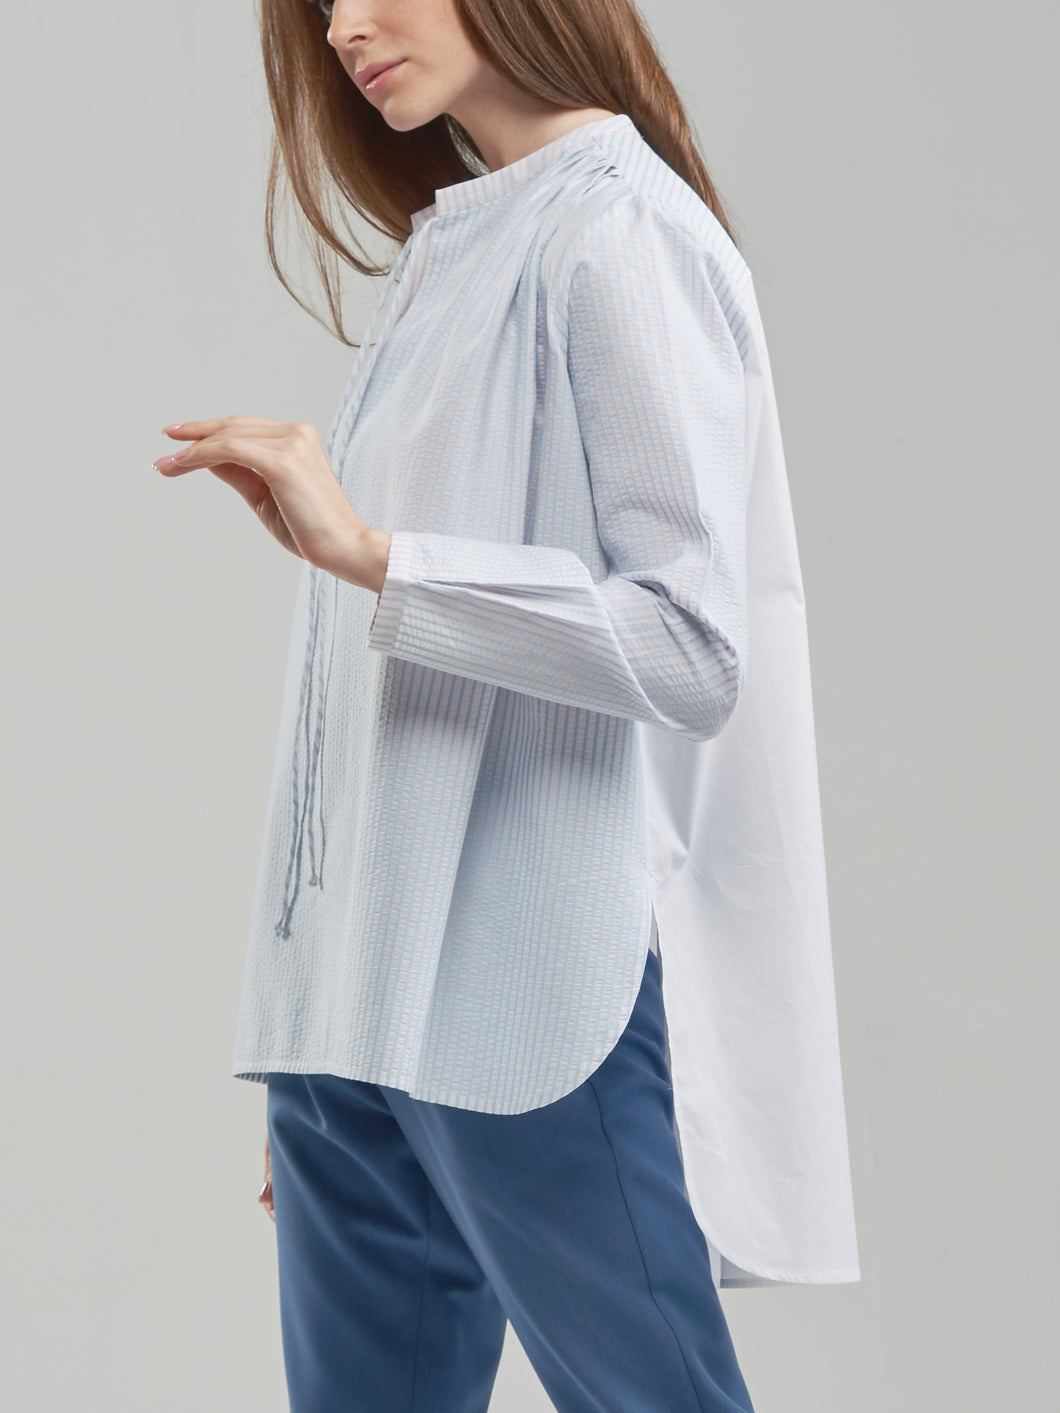 Oversized Sky Blue Shirt with Pink Contrast